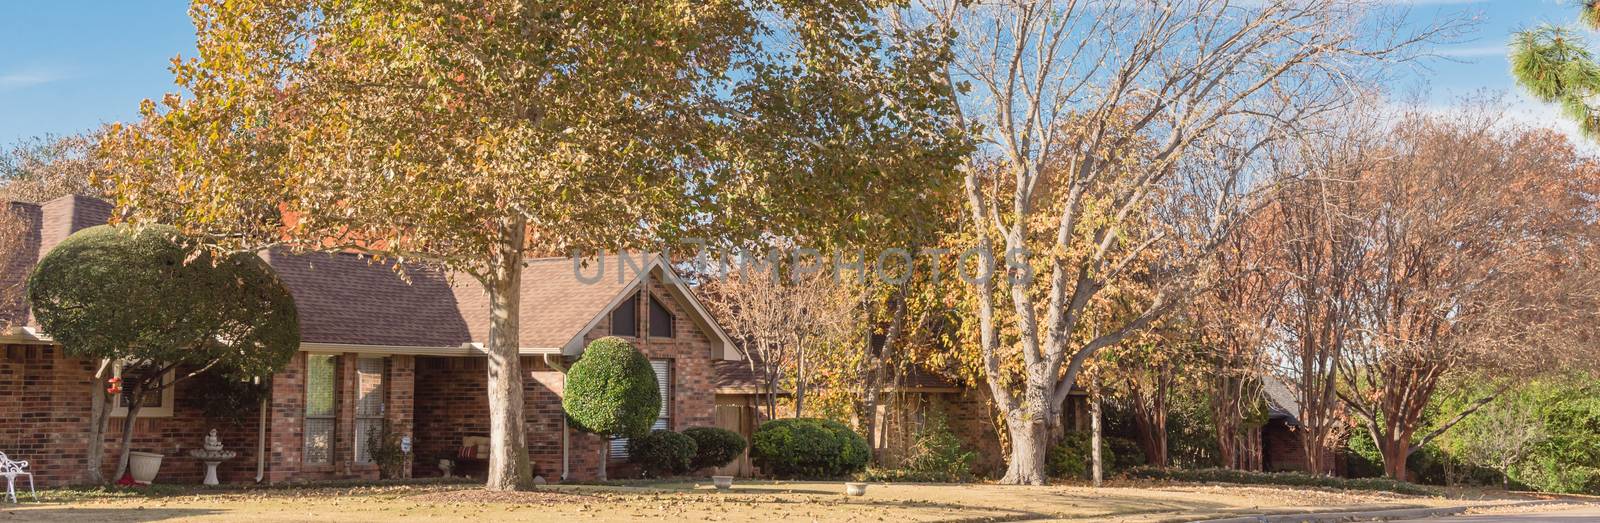 Panorama view typical bungalow style house in Dallas, Texas suburbs during fall season with colorful autumn leaves. Middle class neighborhood single story residential home with mature tree